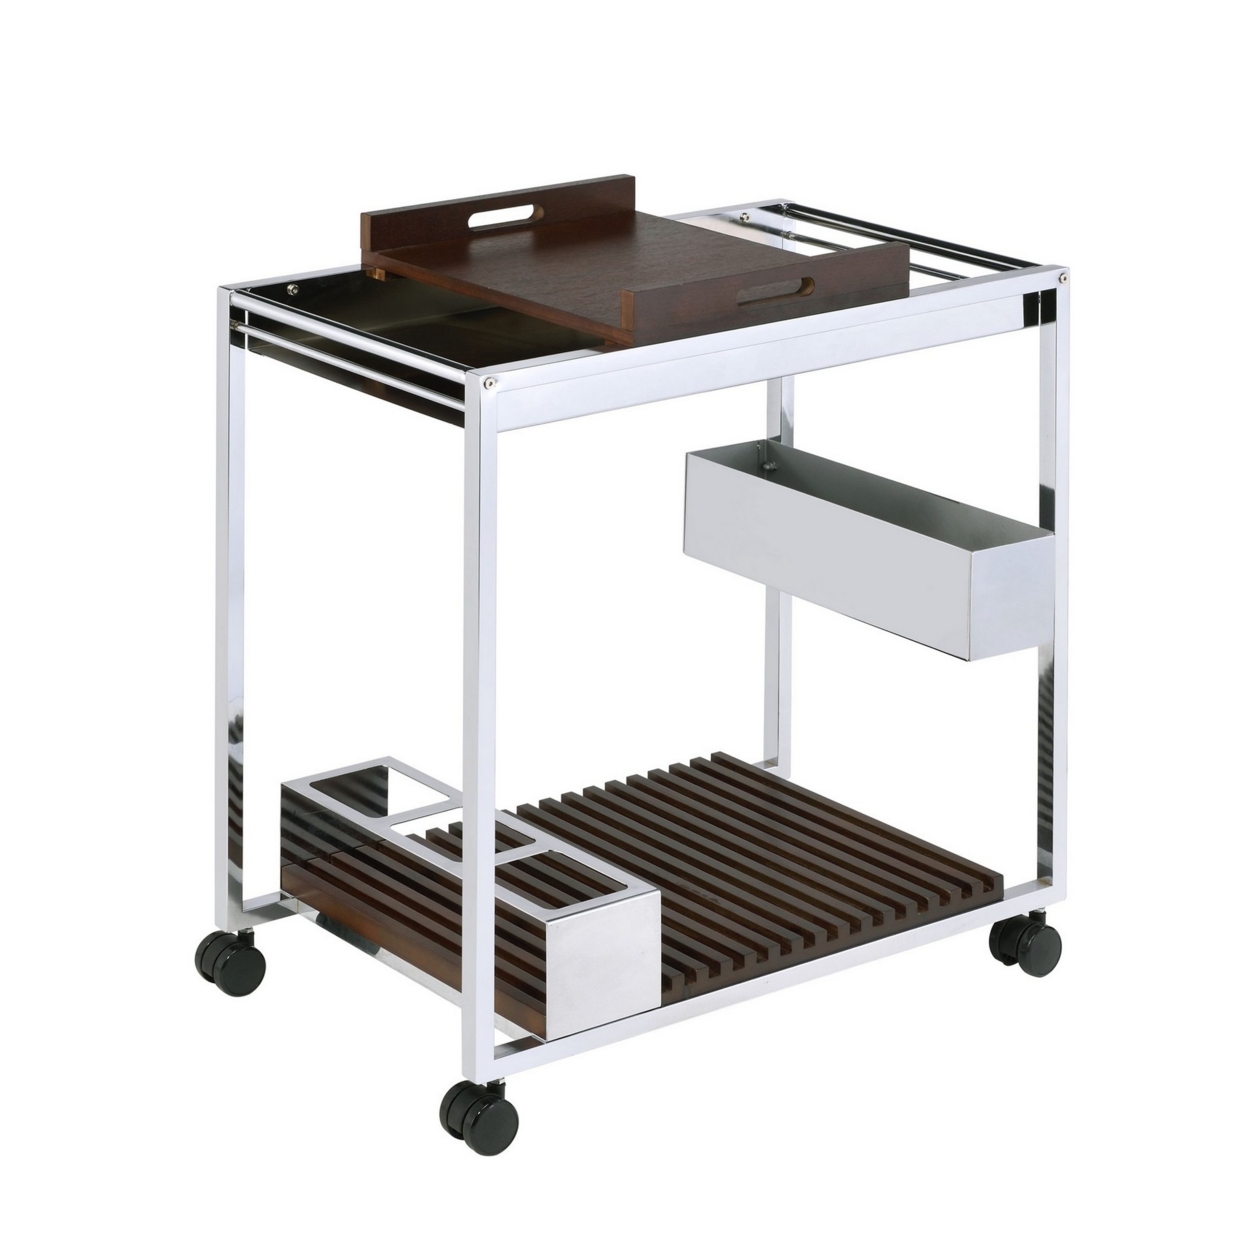 Metal And Wood Serving Cart With Tray And Floating Shelf, Brown And White